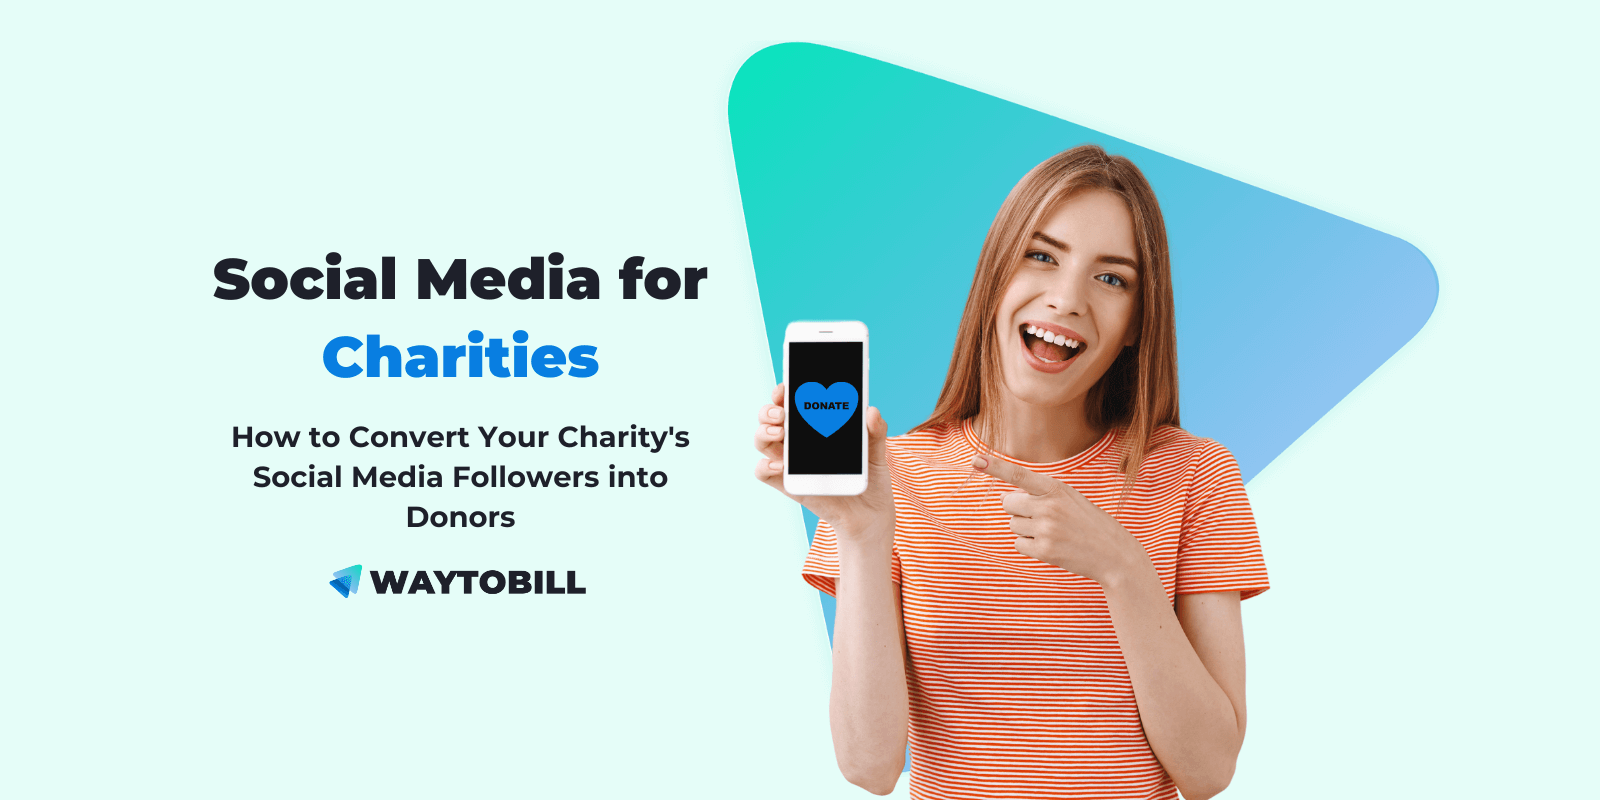 How to Convert Social Media Followers Into Donors for Your Charity?